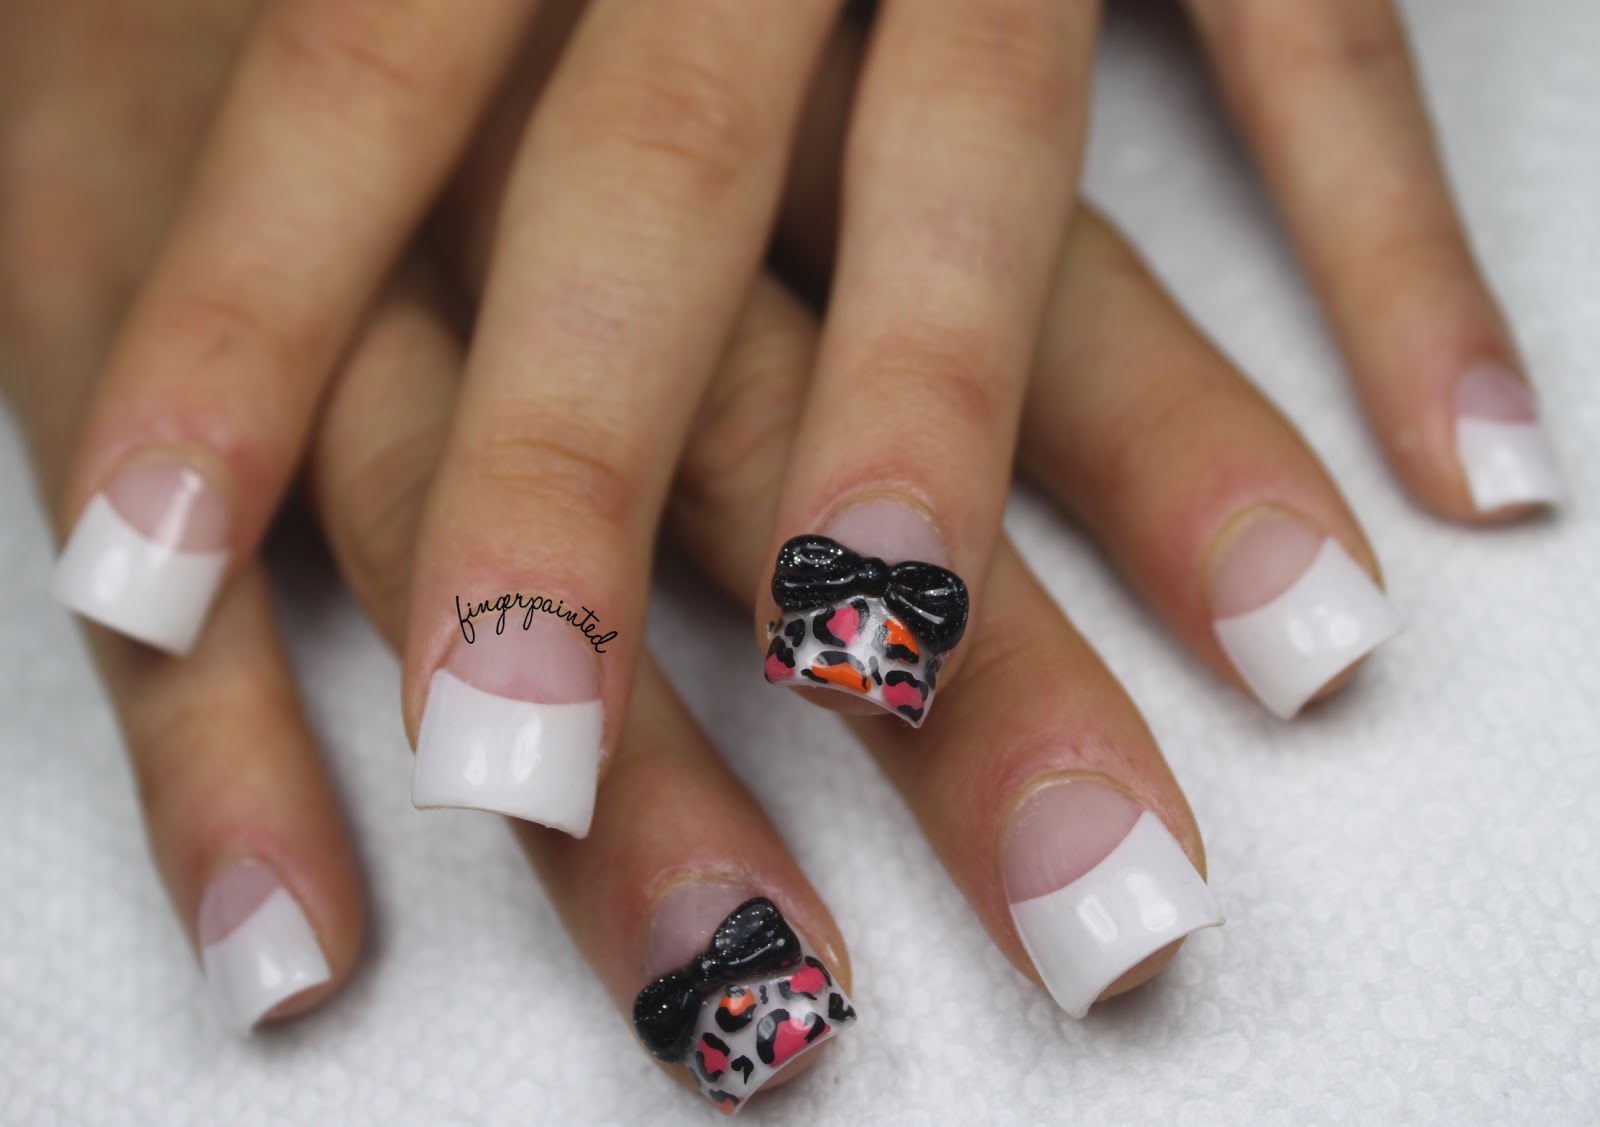 Acrylic Nail Design with 3D Bows - wide 5